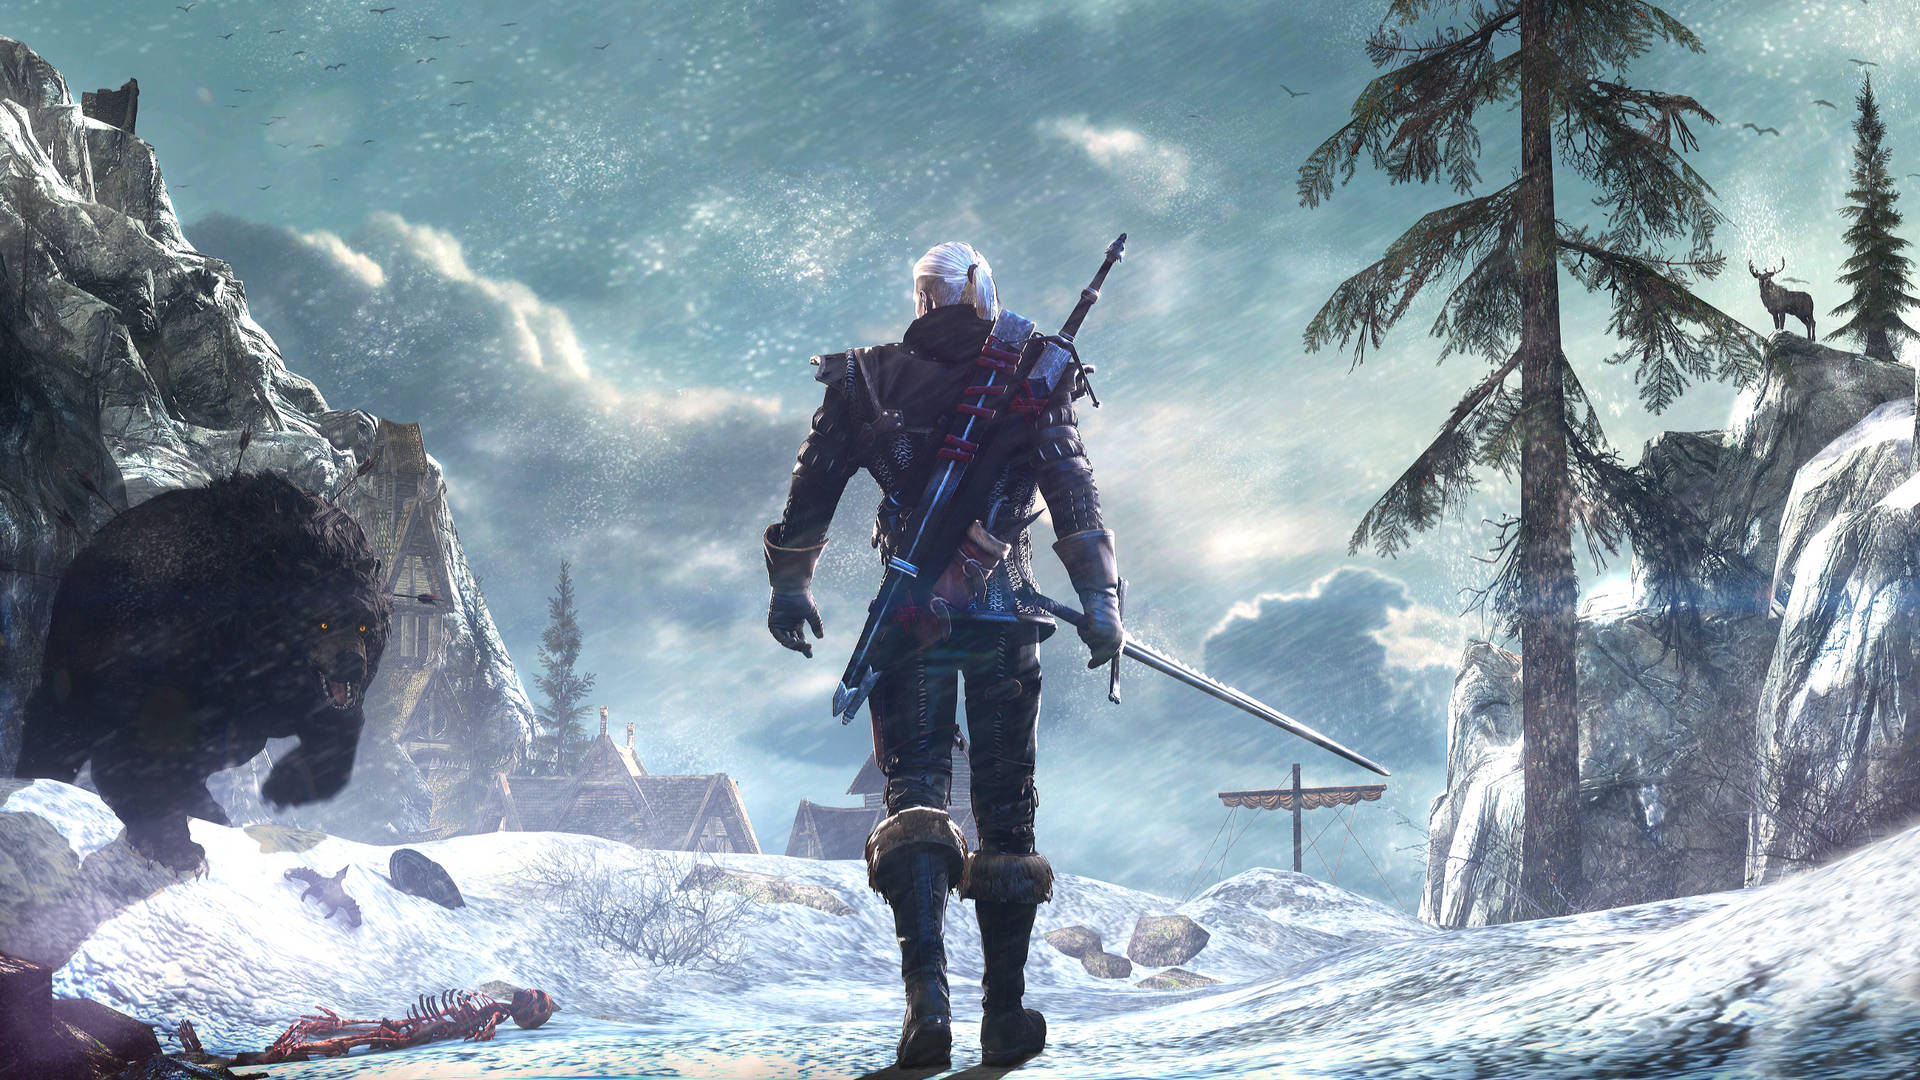 “Geralt of Rivia braving the frost in The Witcher 3: Wild Hunt.” Wallpaper